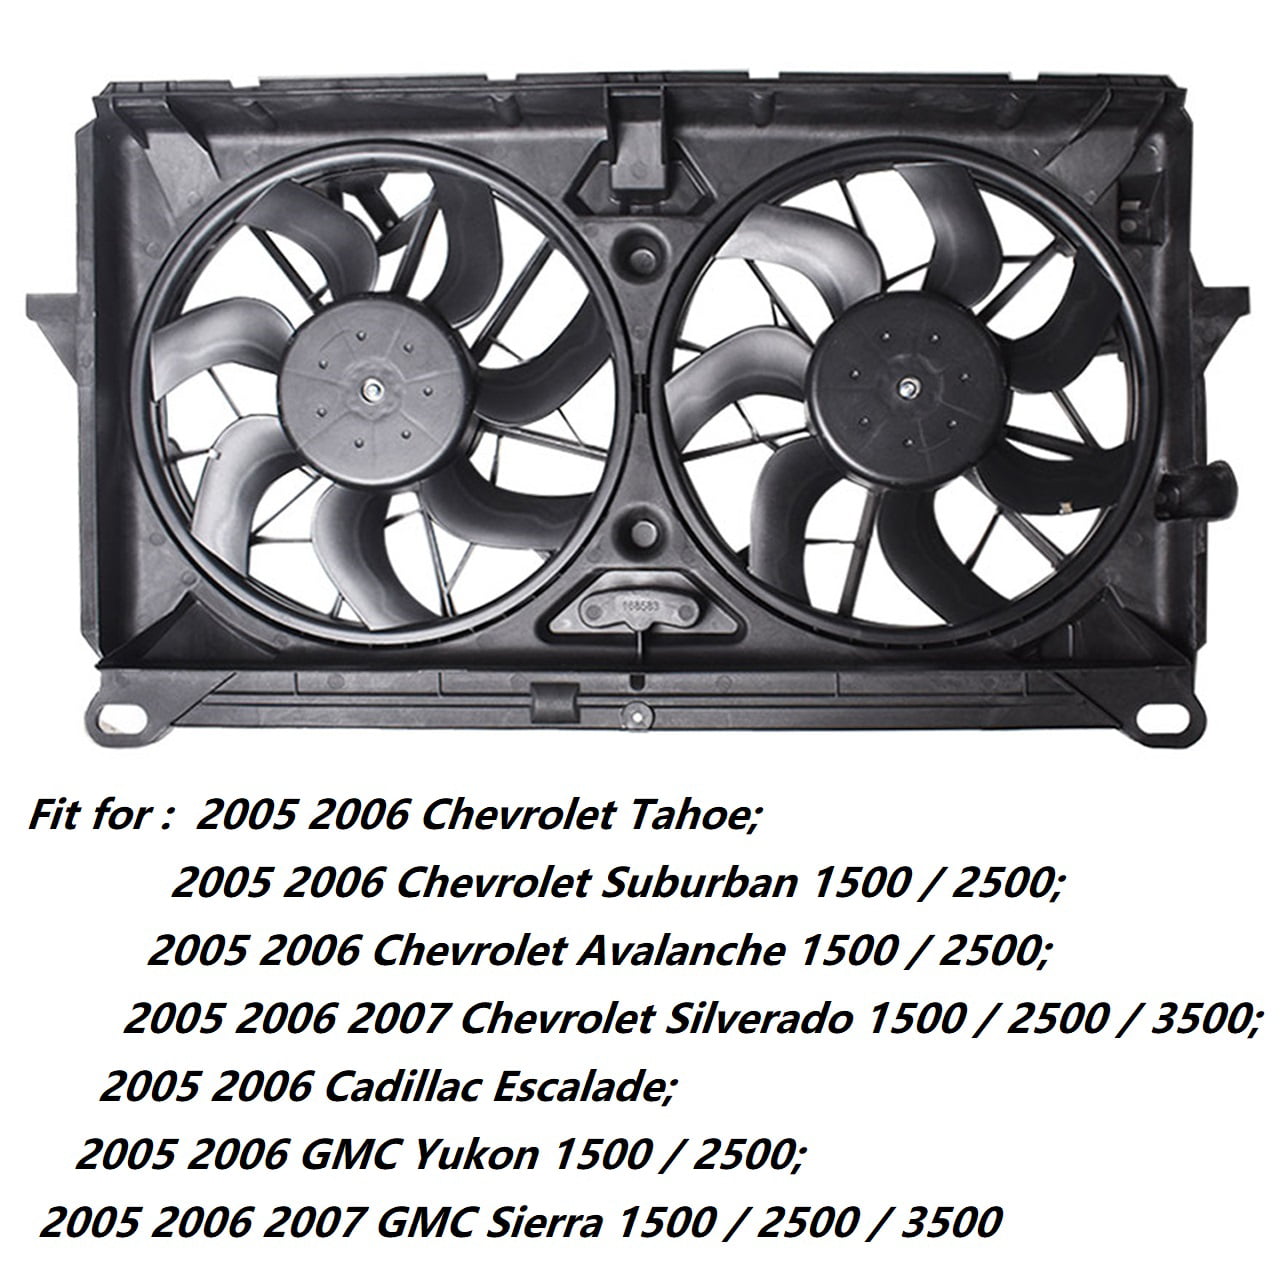 labwork Radiator Cooling Fan GM3115212 Replacement for 2005 2006 2007 Chevy Avalanche Silverado Suburban Cadillac Escalade GMC Sierra 89023365 89023366 89023368 